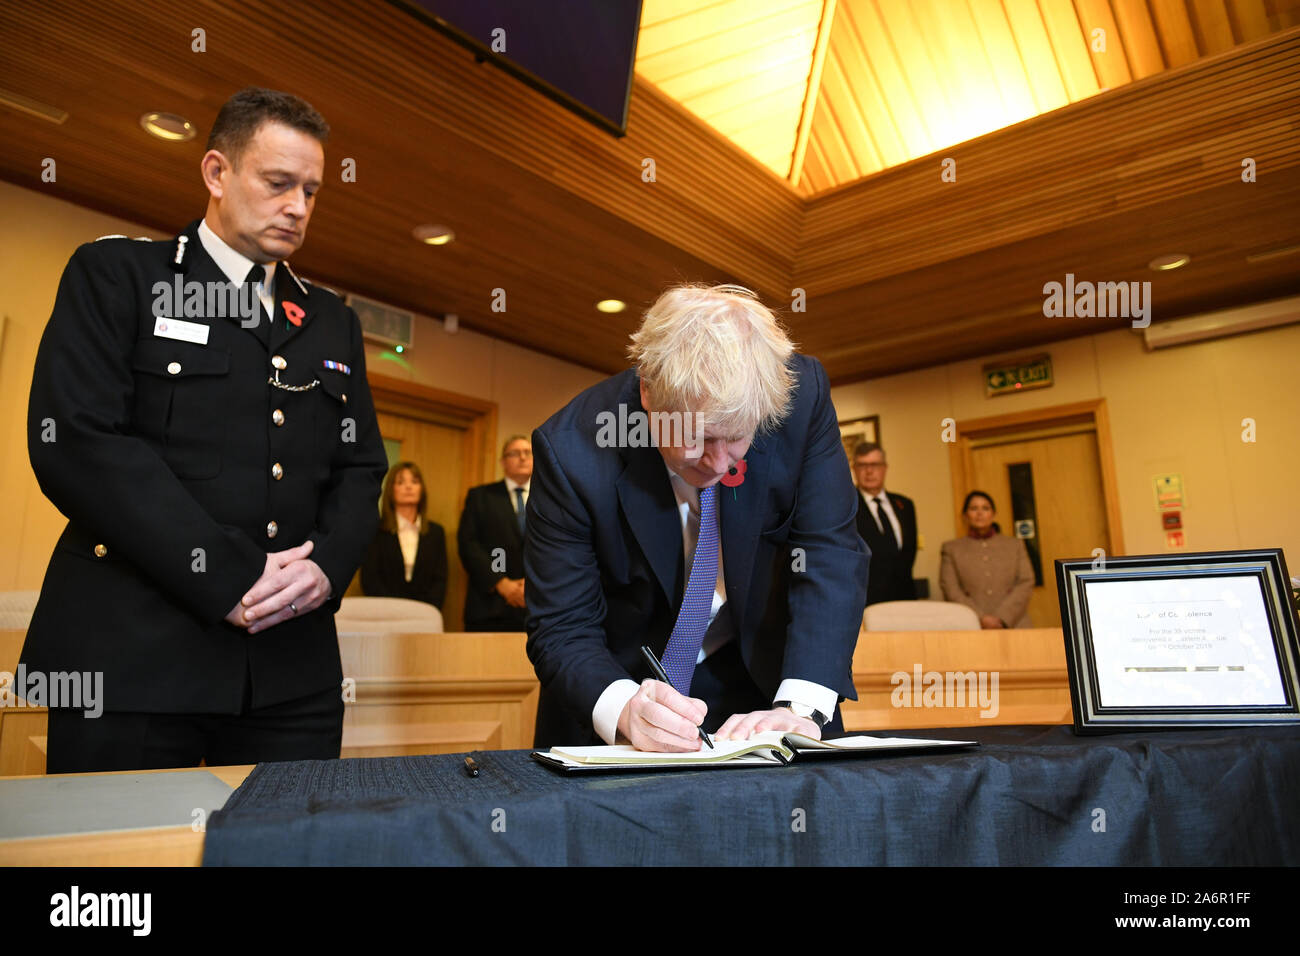 Prime Minister Boris Johnson signs a book of condolence during a visit to Thurrock Council Offices in Essex after the bodies of 39 people were found in a lorry container last week. Stock Photo